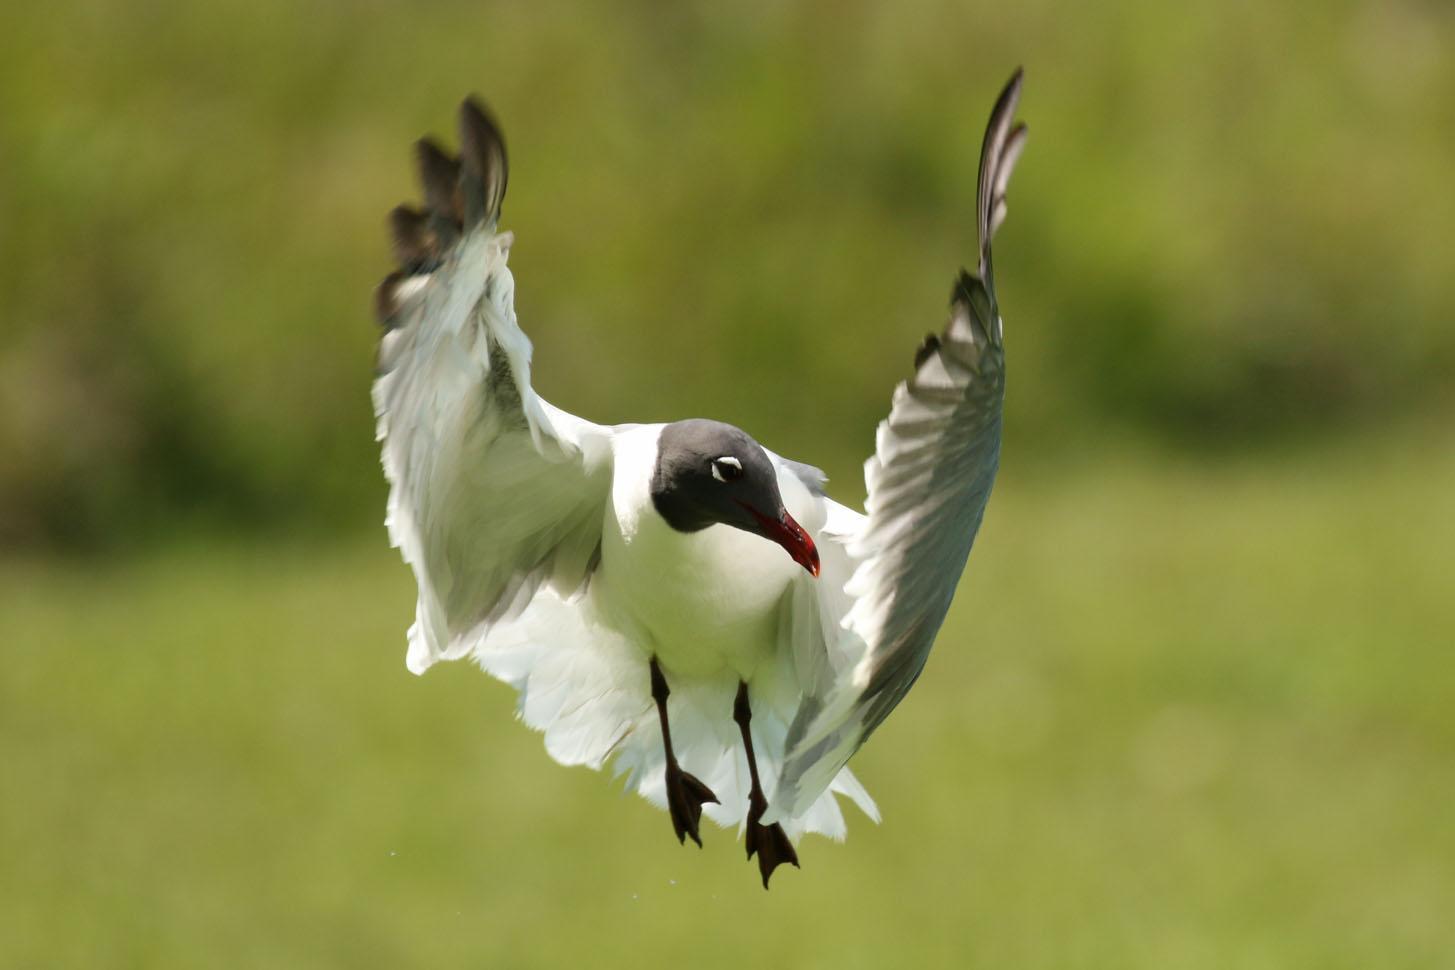 Laughing Gull Photo by Kristy Baker